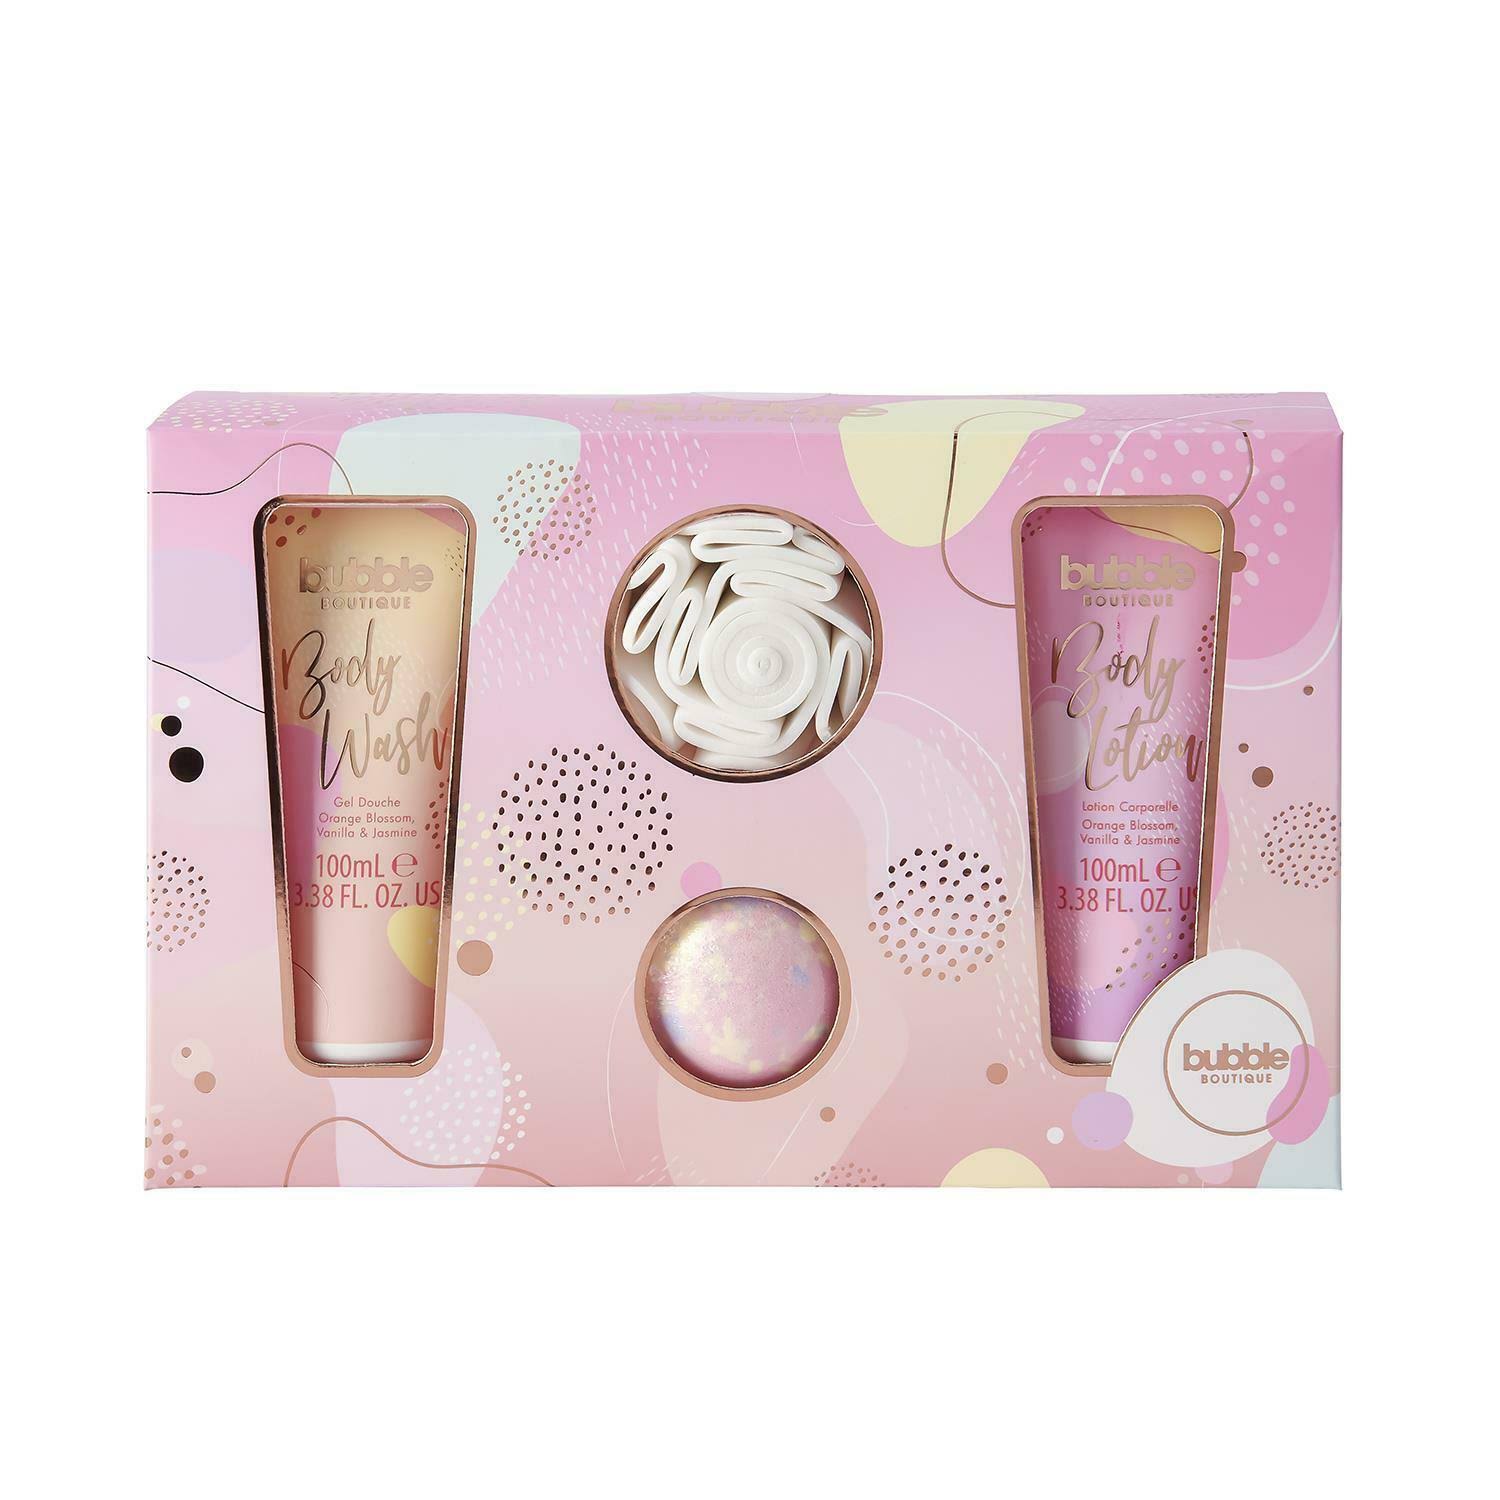 Style & Grace - Bubble Boutique Gift of The Glow Gift Set